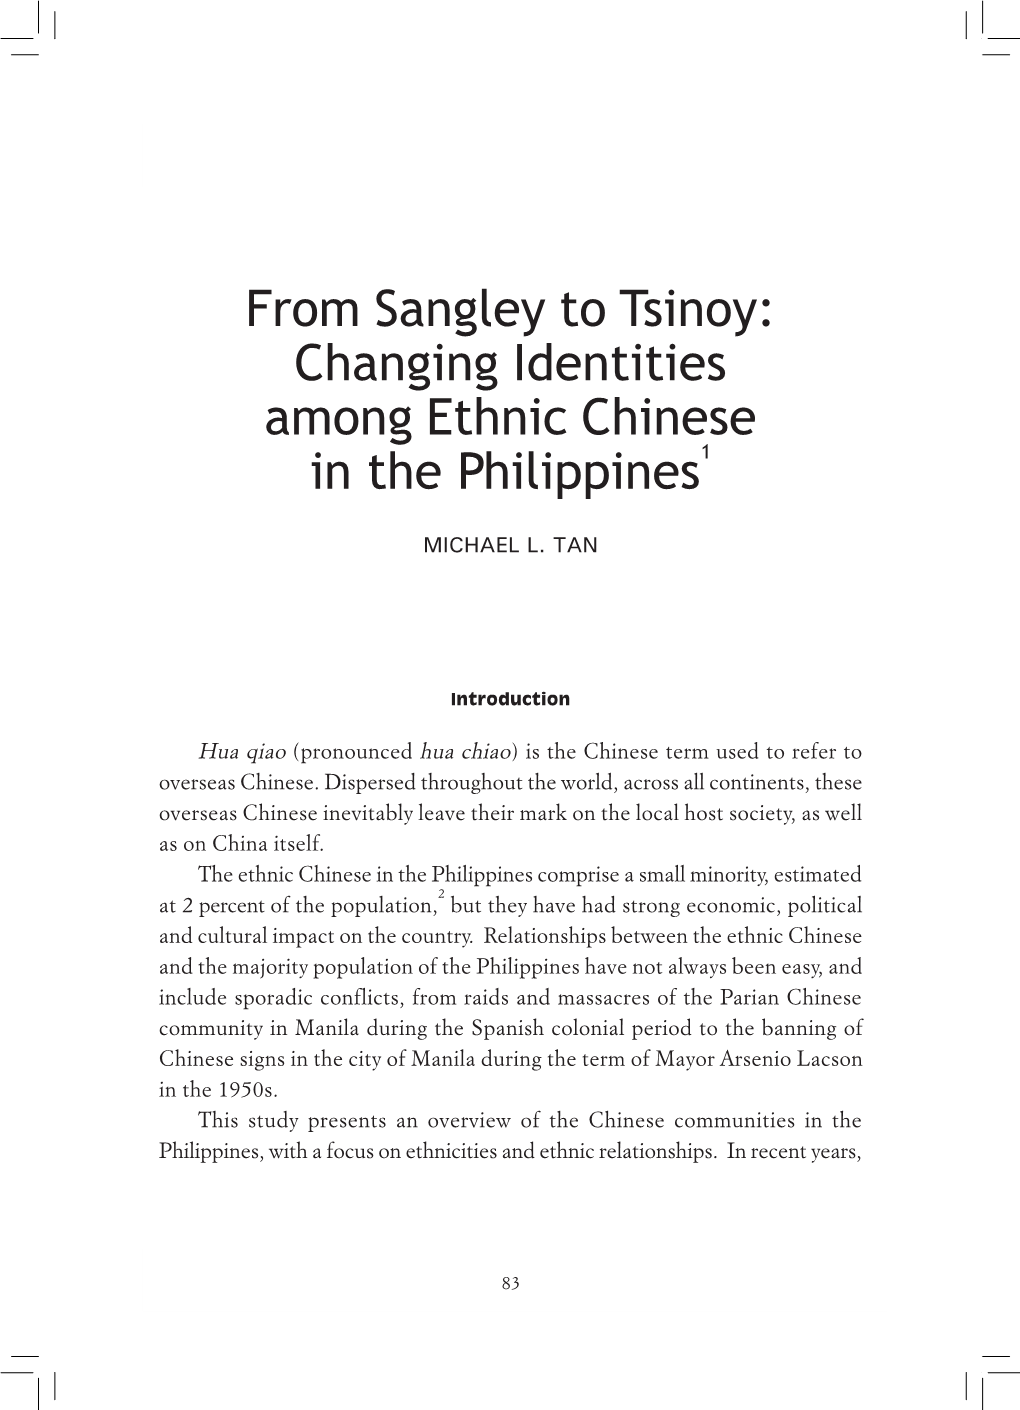 From Sangley to Tsinoy: Changing Identities Among Ethnic Chinese In